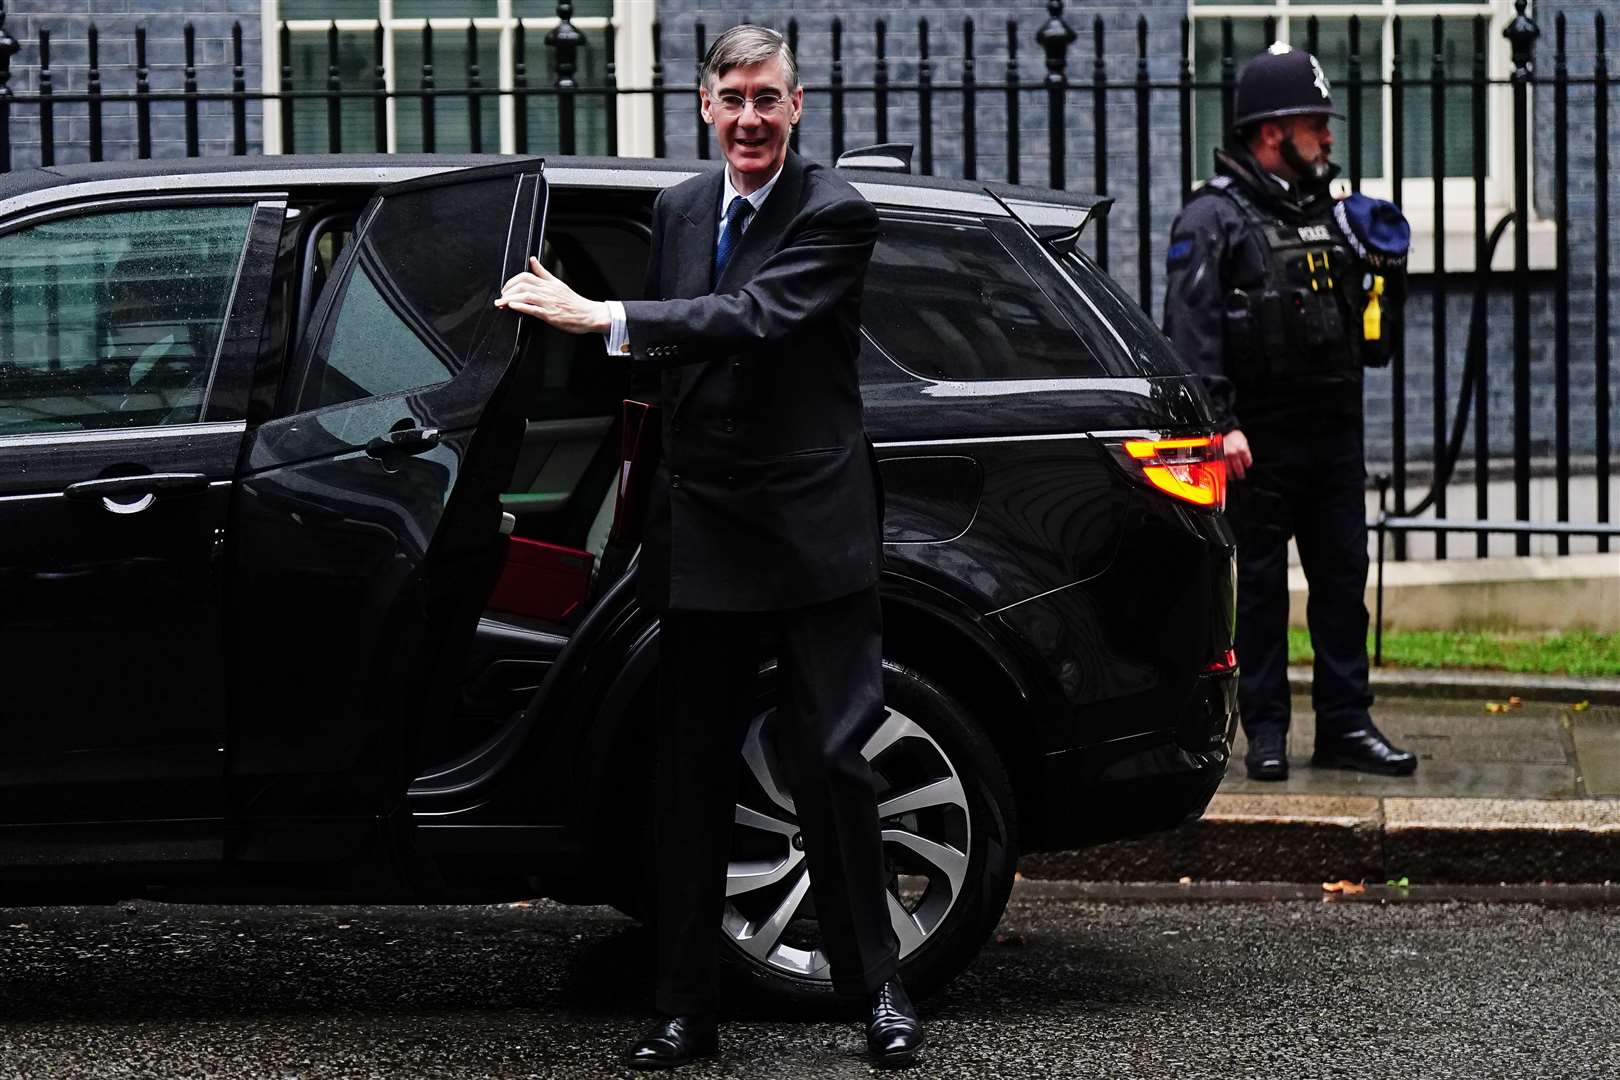 Jacob Rees-Mogg has said strengthening the UK’s energy security is a ‘priority’ (Aaron Chown/PA)